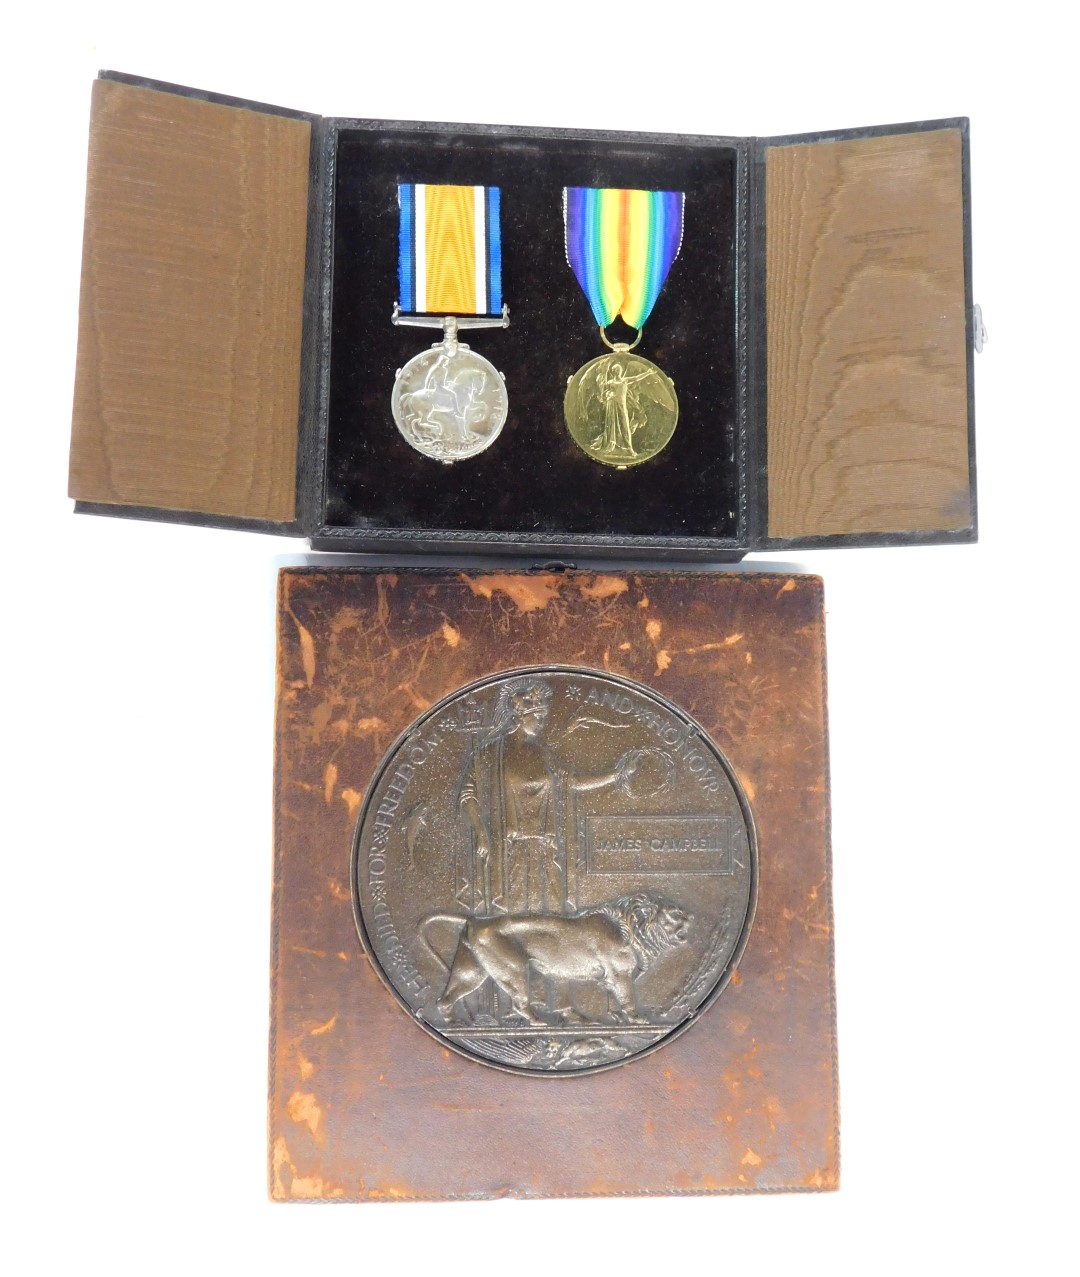 British War and Victory Medals, cased, plus a Memorial Plaque, framed, to S/40141 Pte. James Campbel